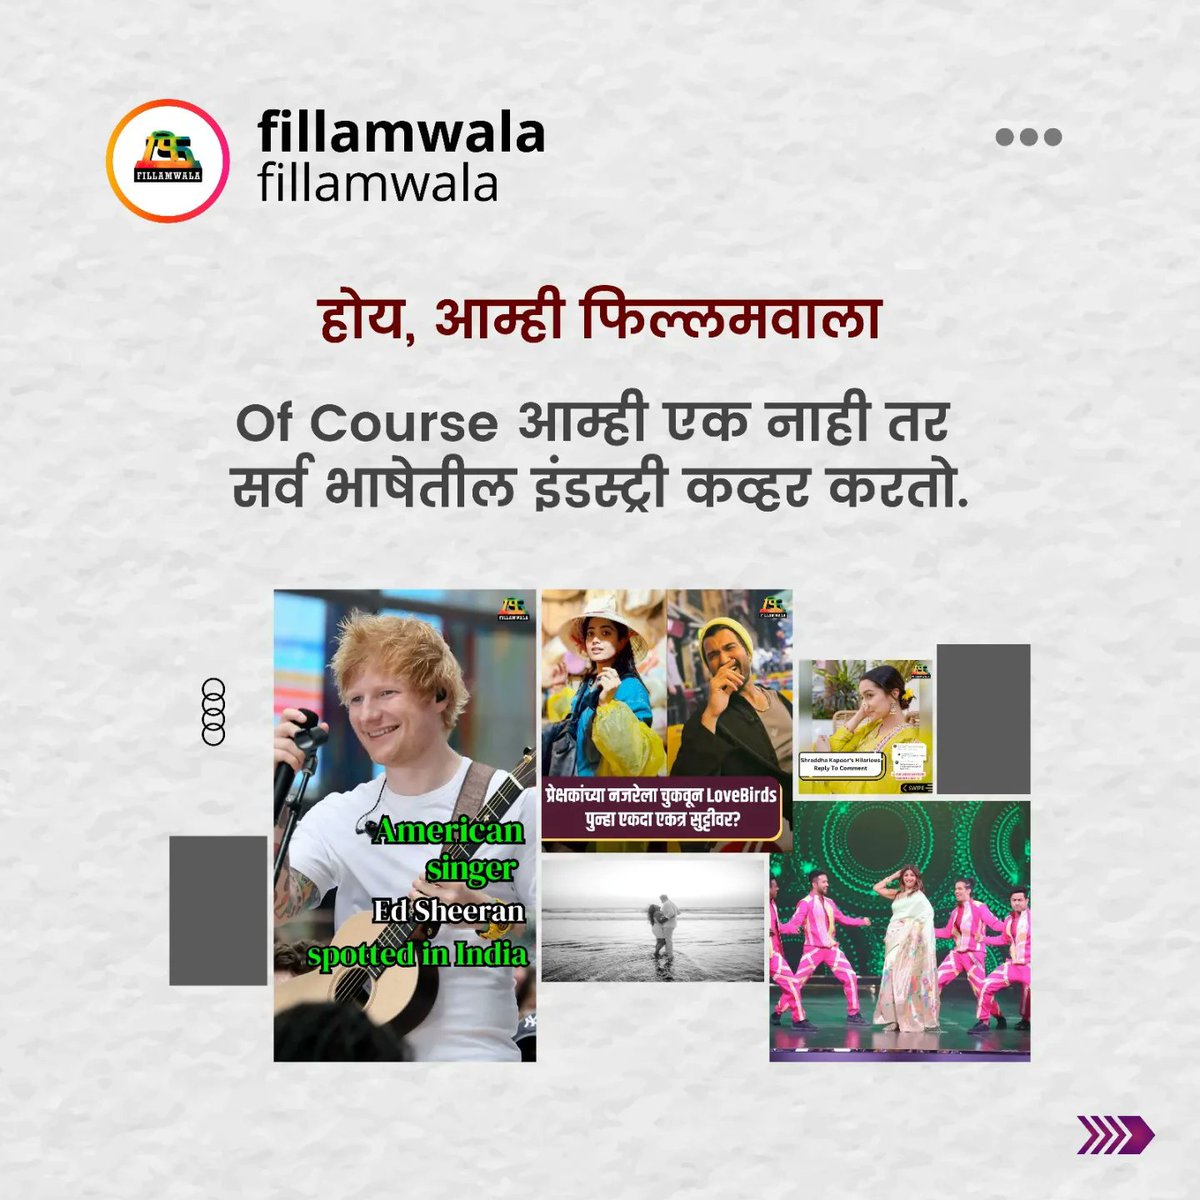 Of Course शेवटी आम्ही फिल्लमवाला...😍❤️🎥🔥

#fillamwala #instagram #ofcourse #explorepage #trending #instagrampage #attheend #Bollywood #marathi #actors #viral

Tap the link 
instagram.com/p/C4k2-EVBSbY/…